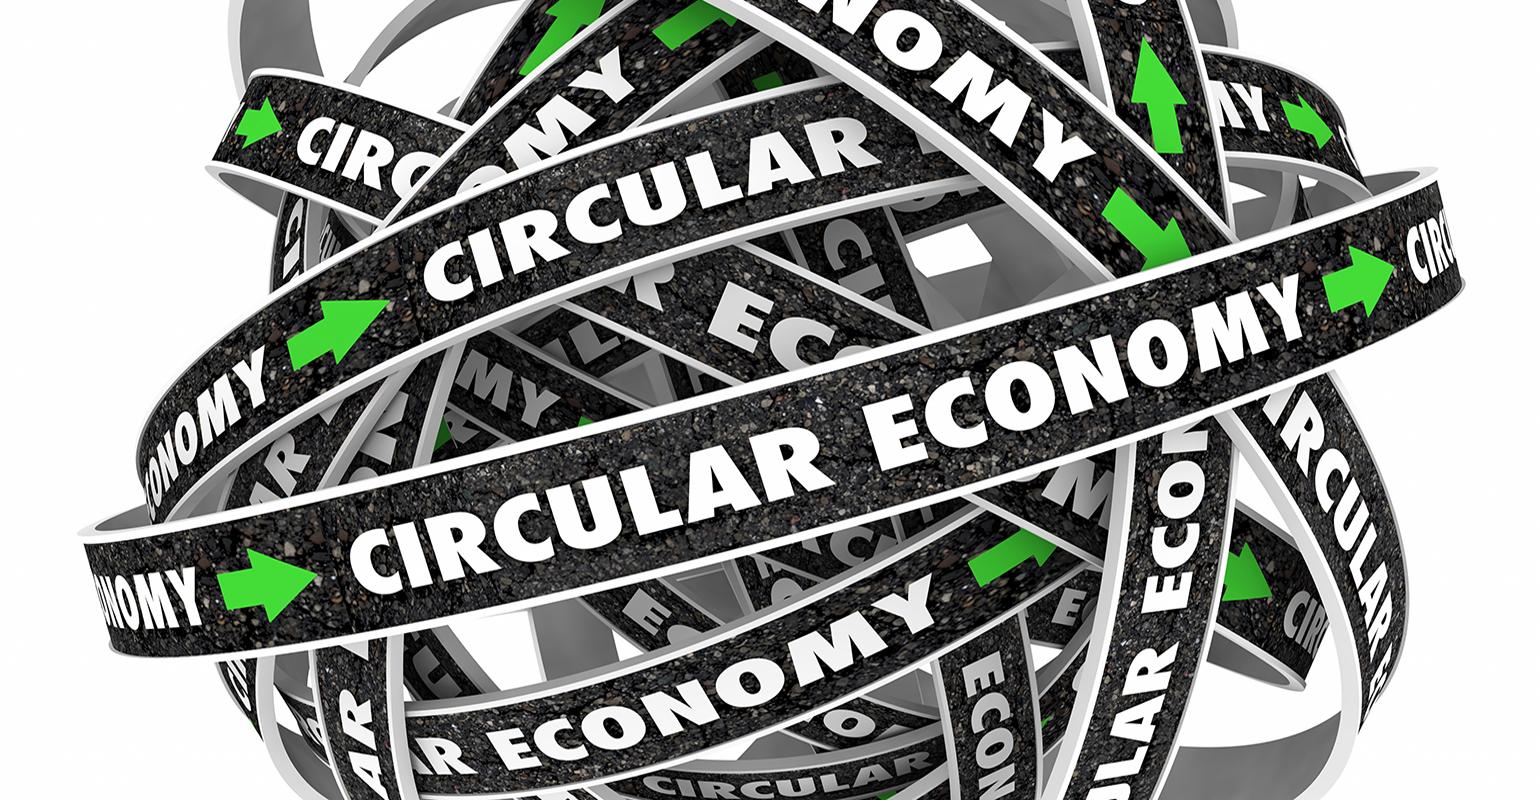 The US Pact unveils Roadmap to achieve circular economy goals until 2025